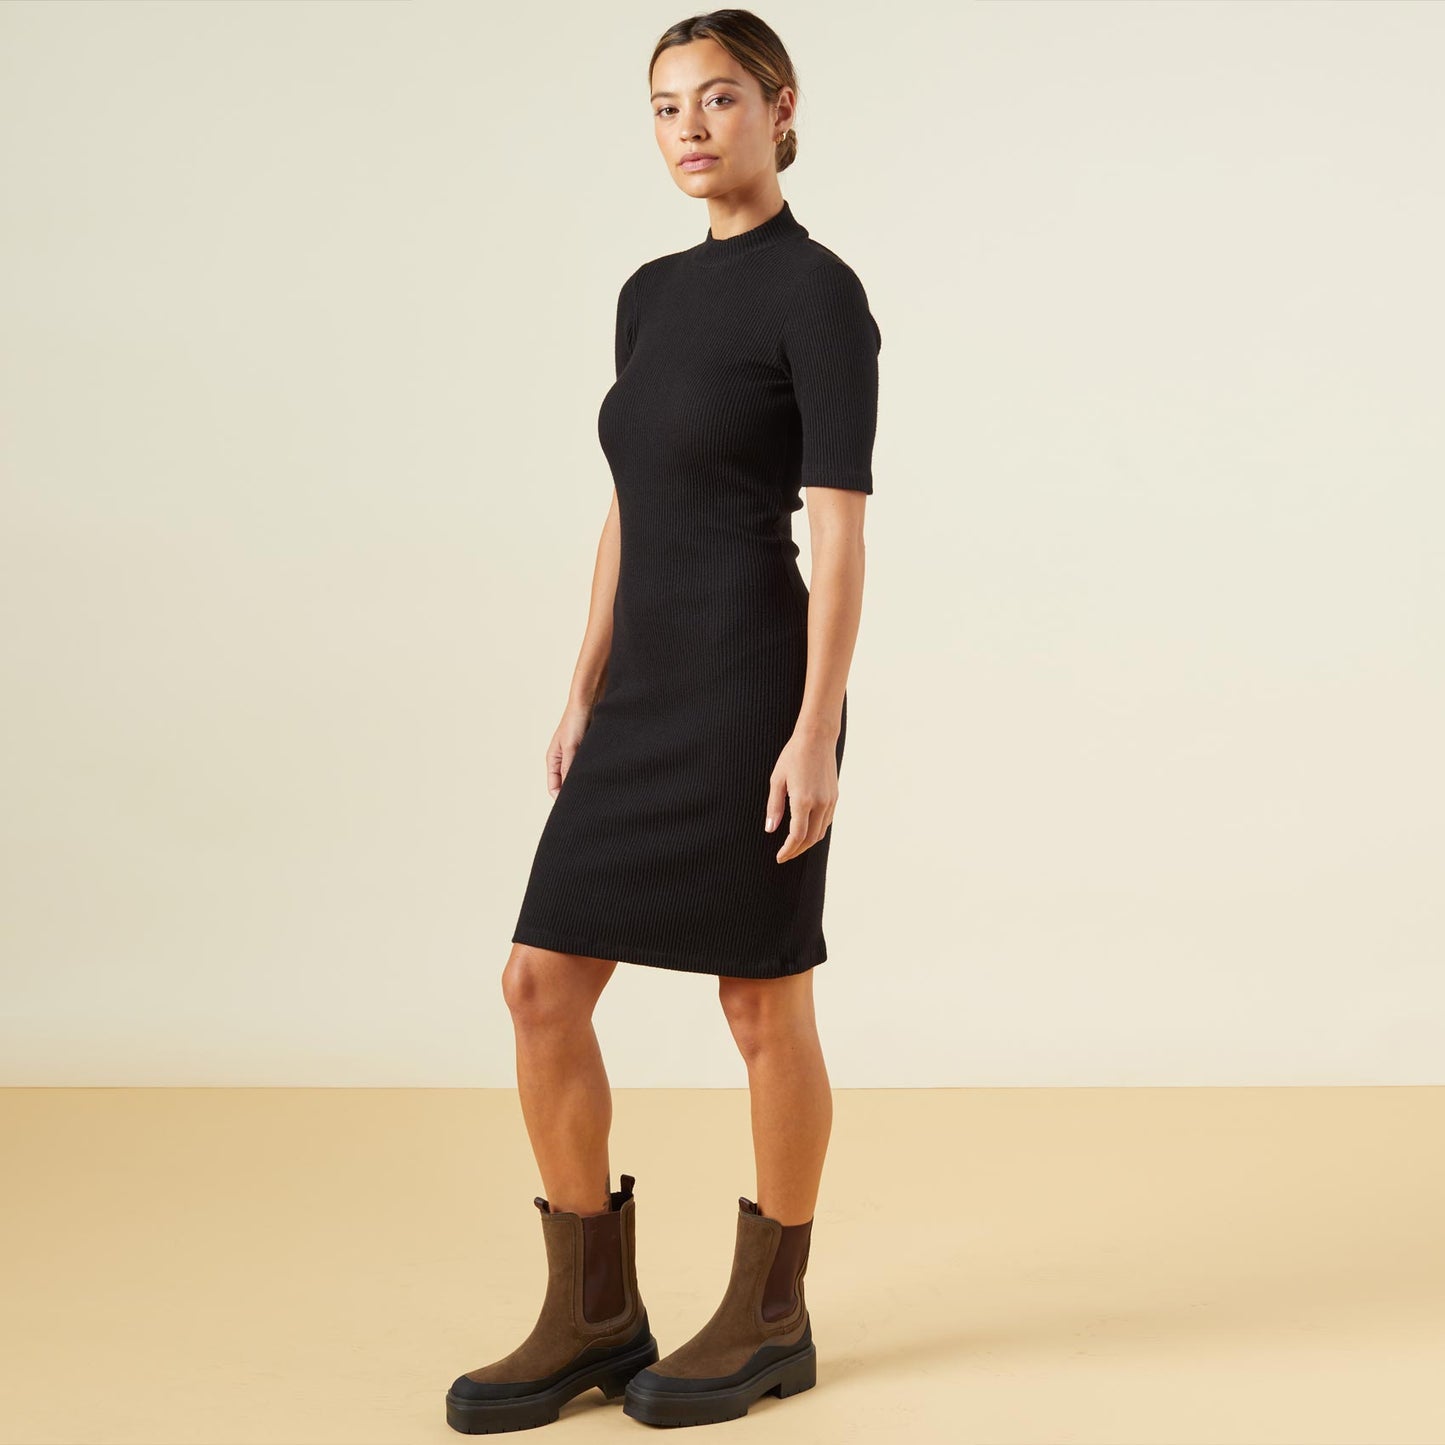 Side view of model wearing the brushed rib mock neck dress in black.